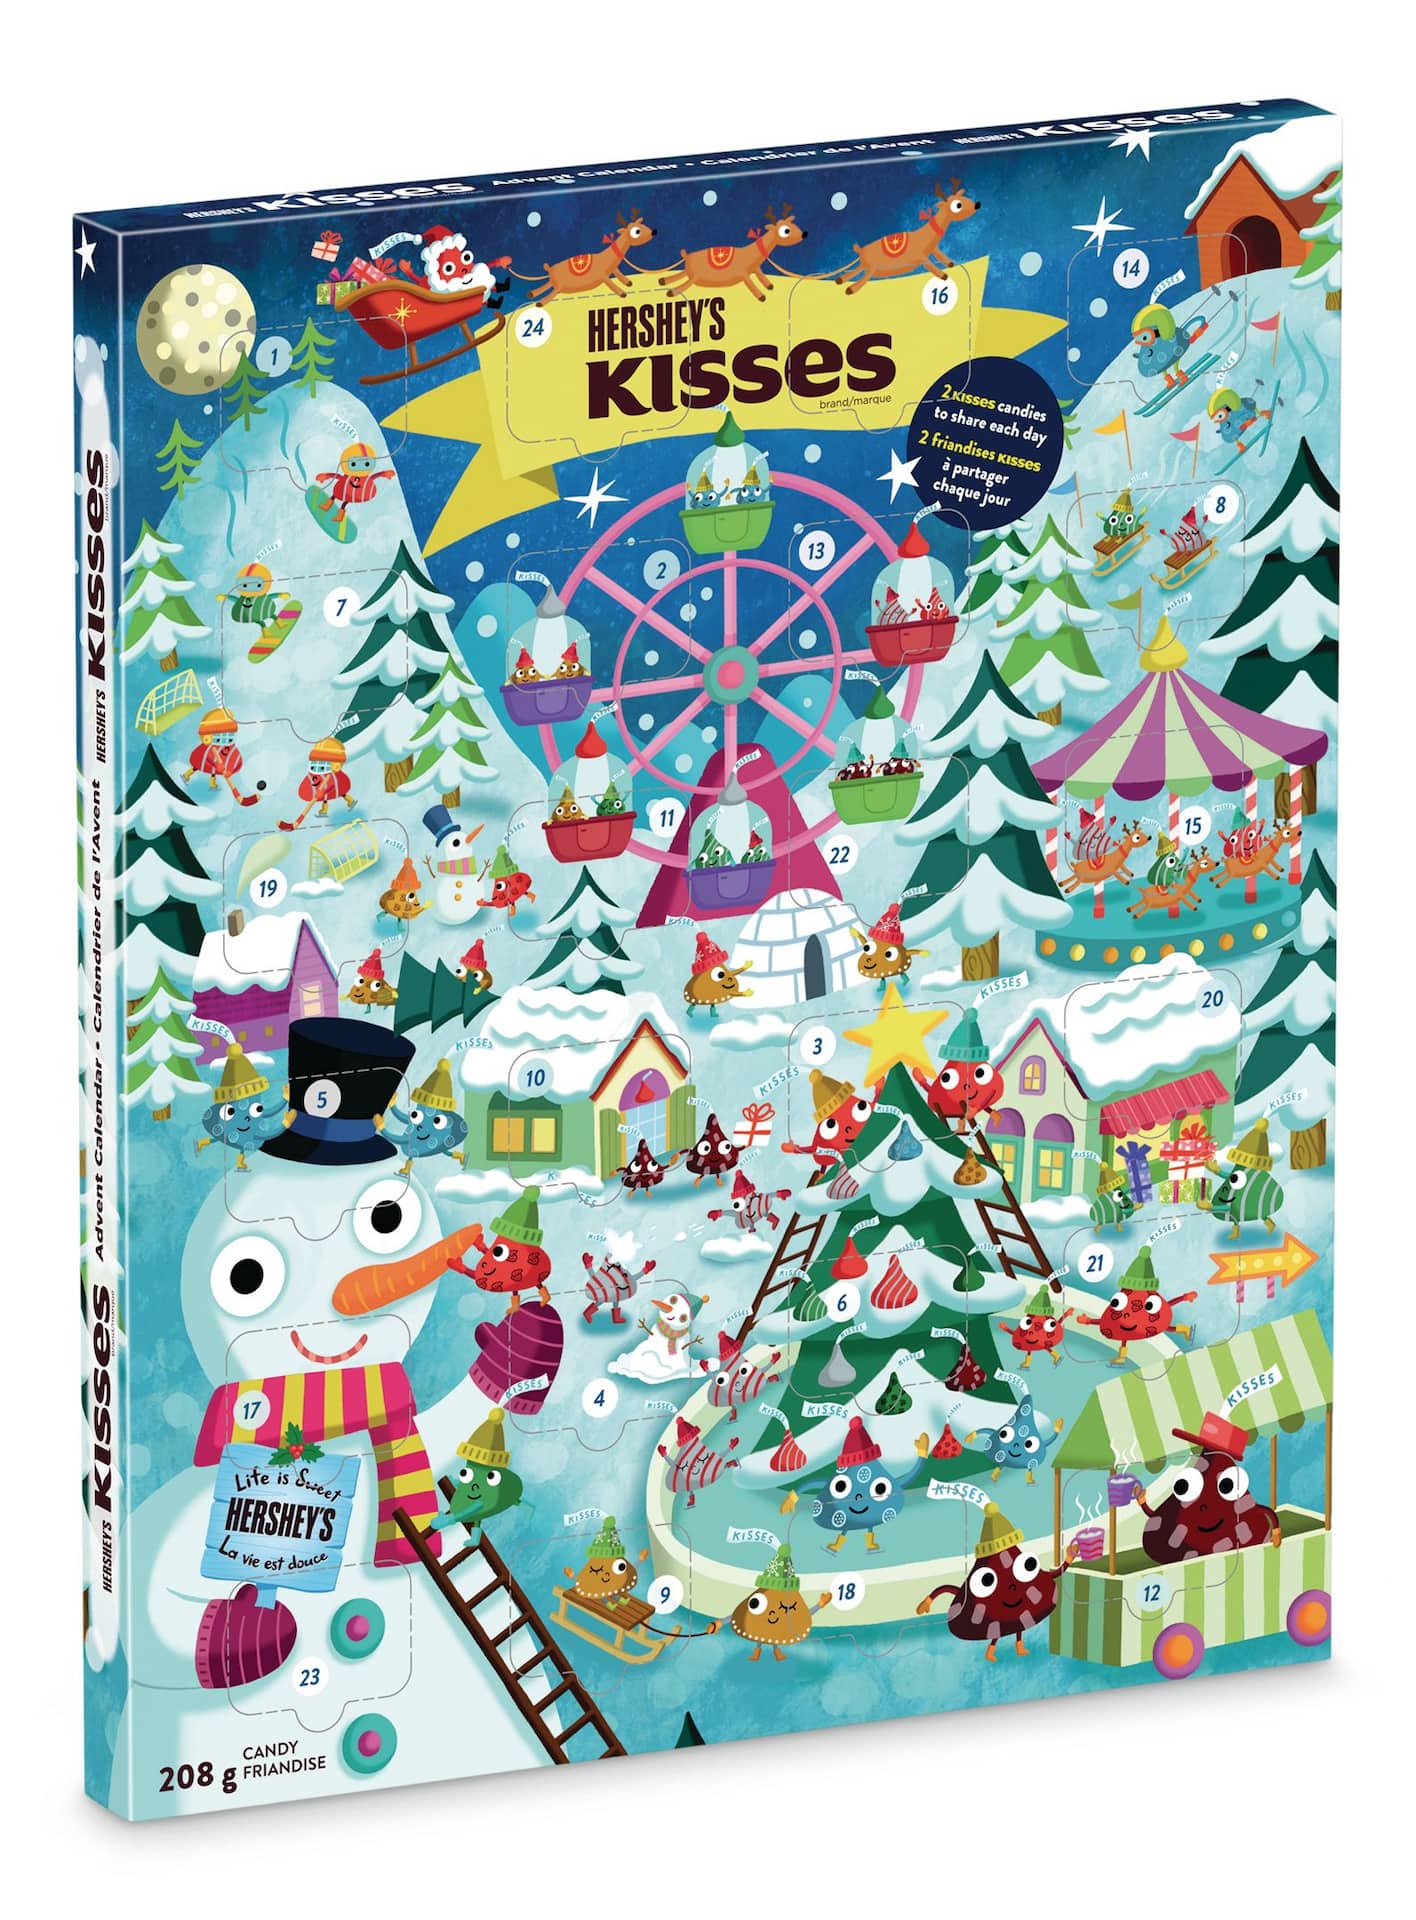 hershey-s-kisses-chocolate-holiday-advent-calendar-208-g-canadian-tire